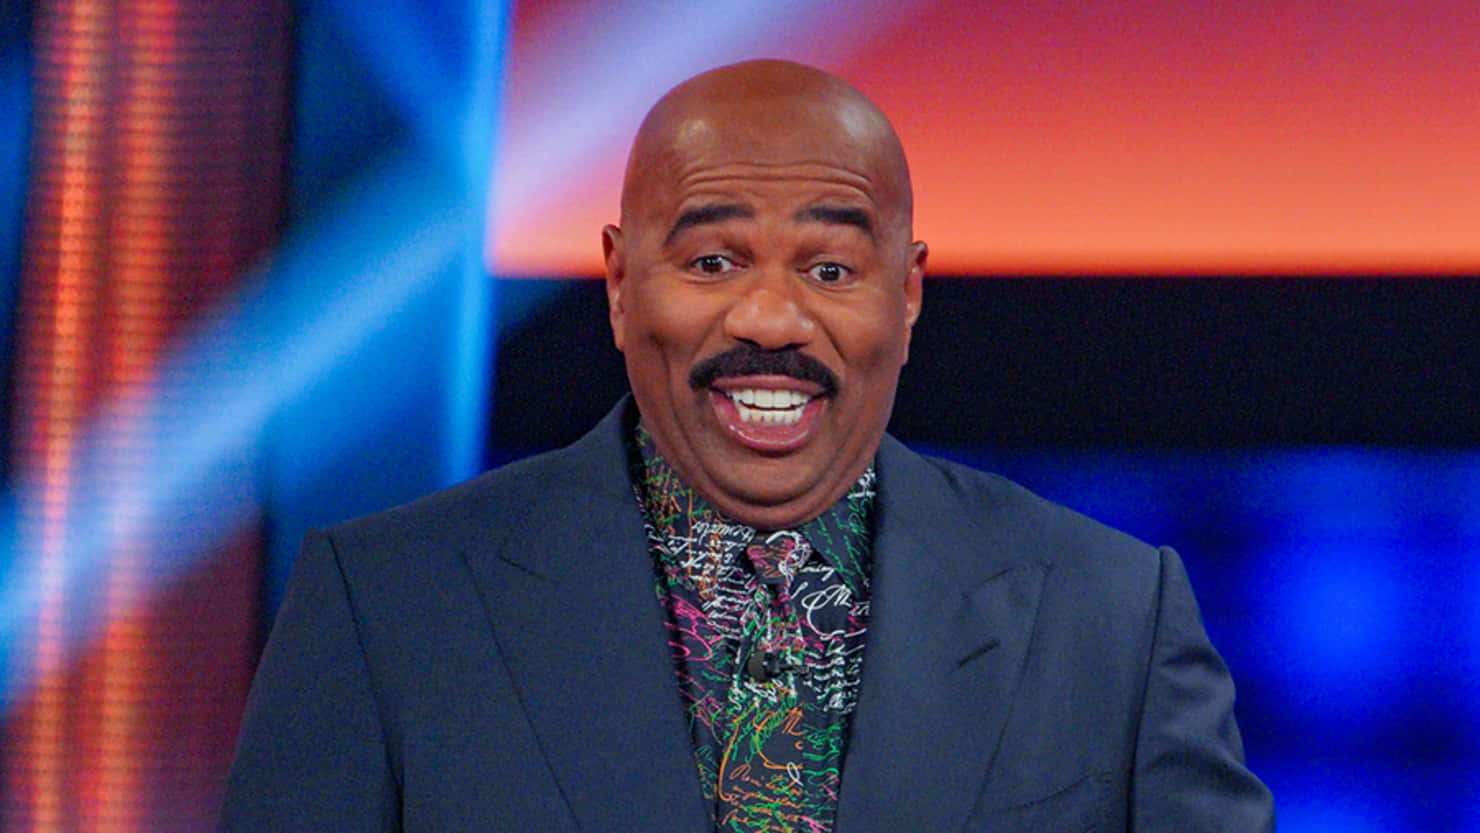 Steve Harvey Smiling In A Colorful Shirt